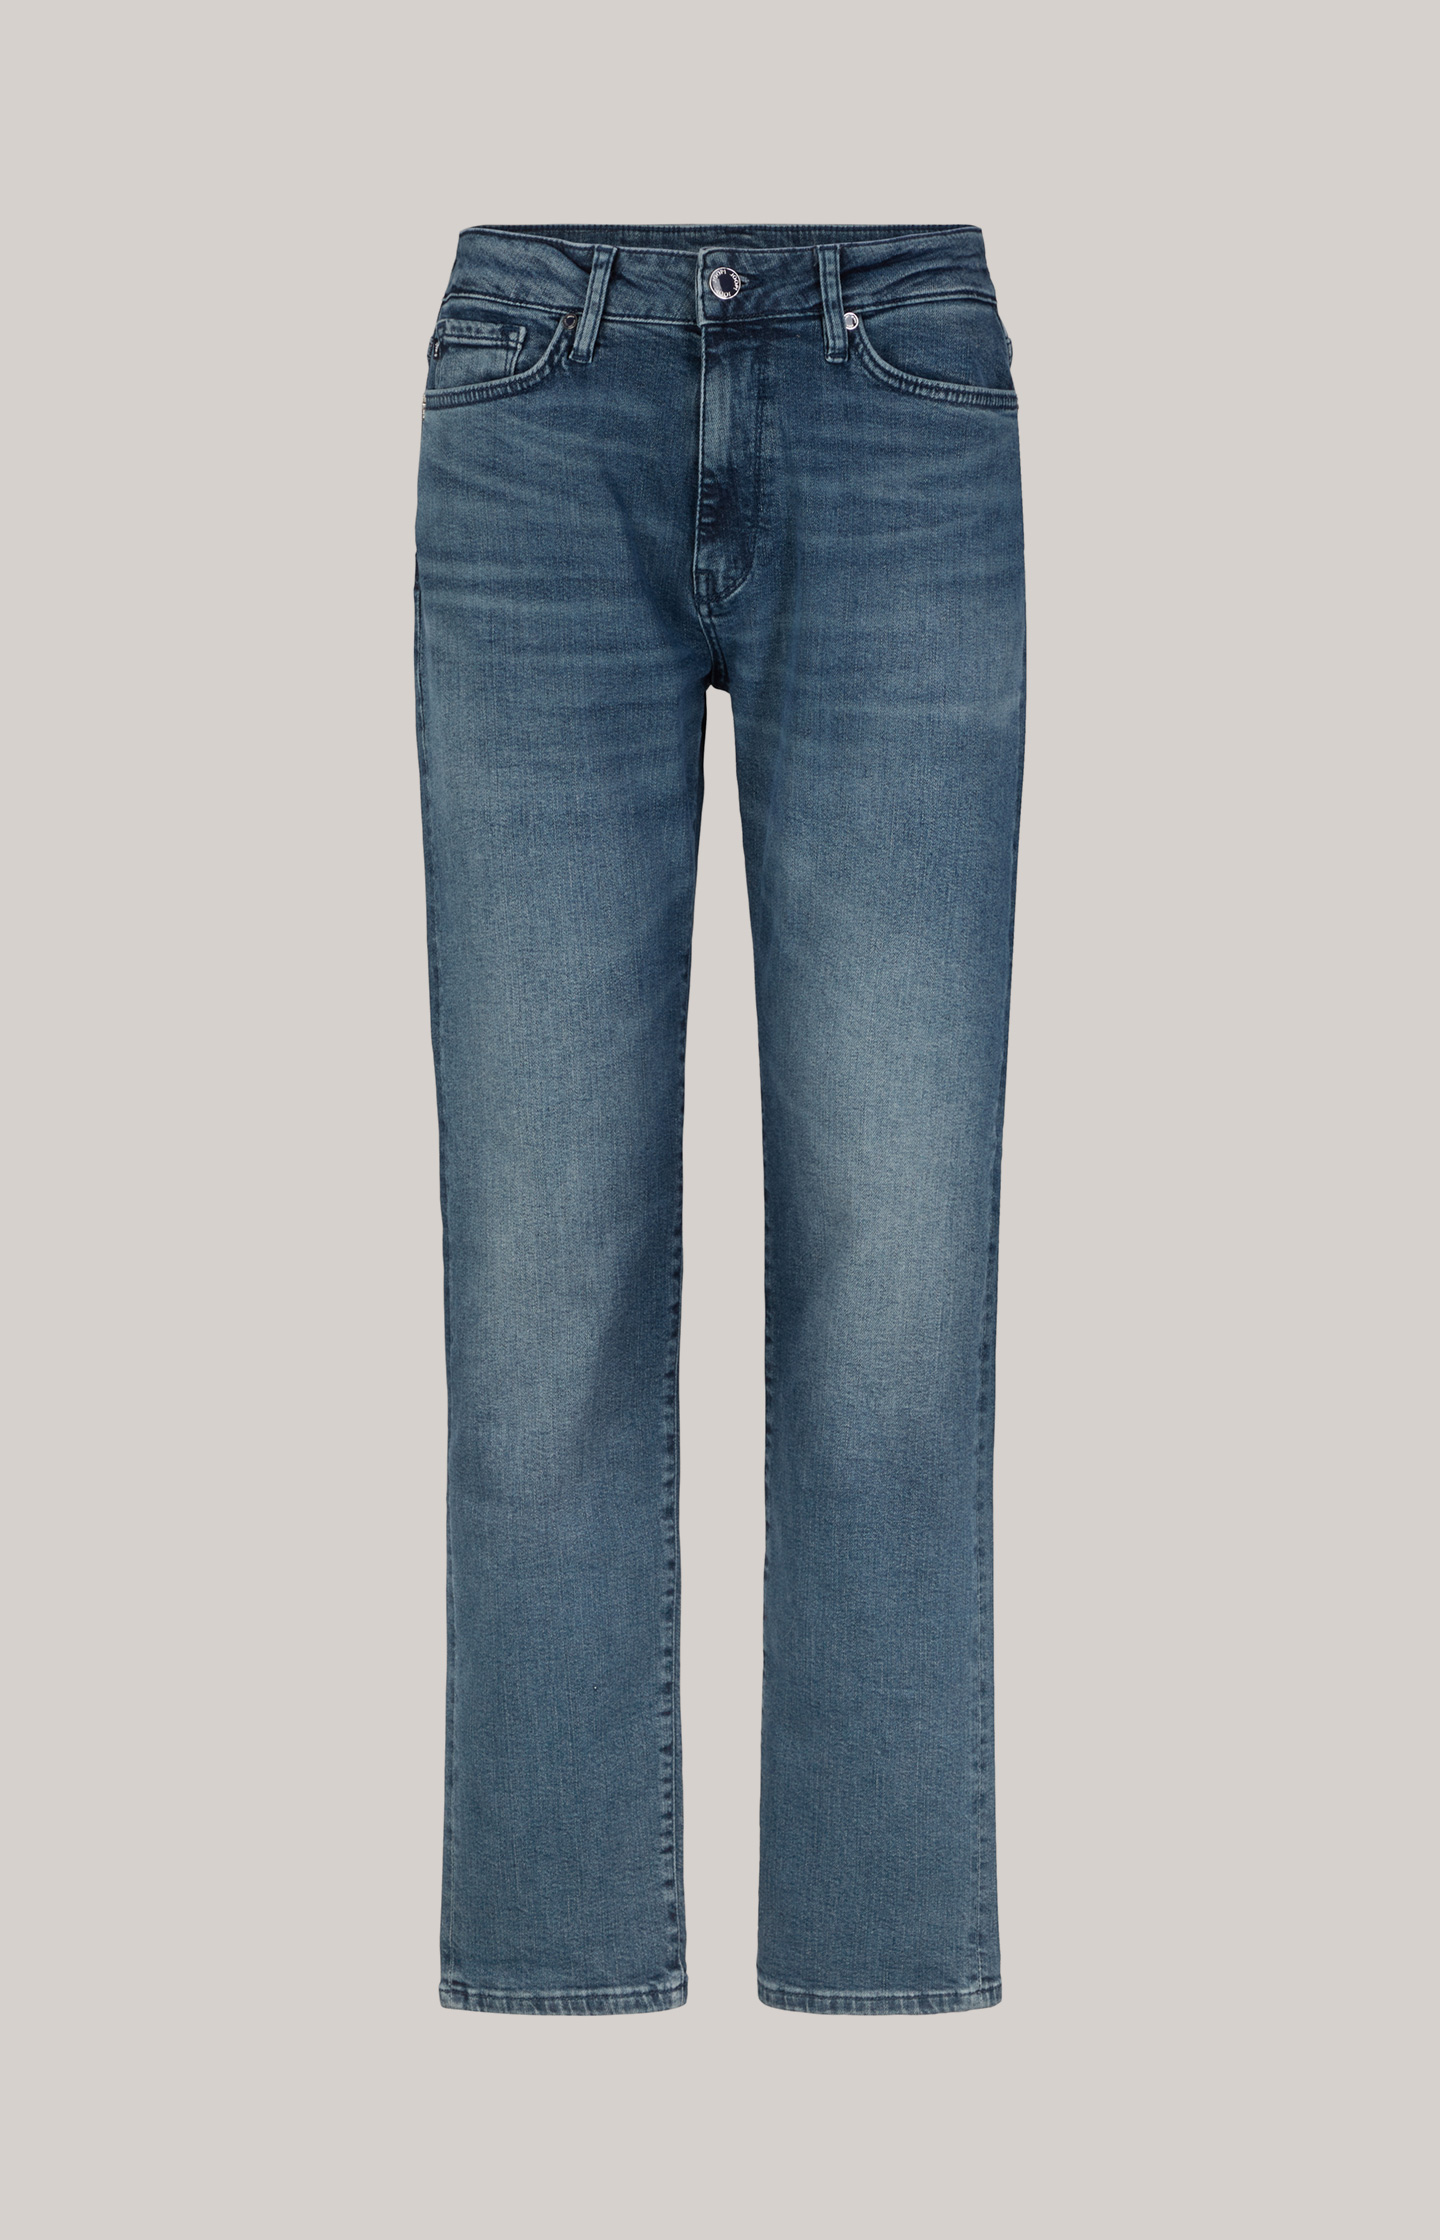 Jeans in a Denim Shop Online - Look in the JOOP! Washed Blue